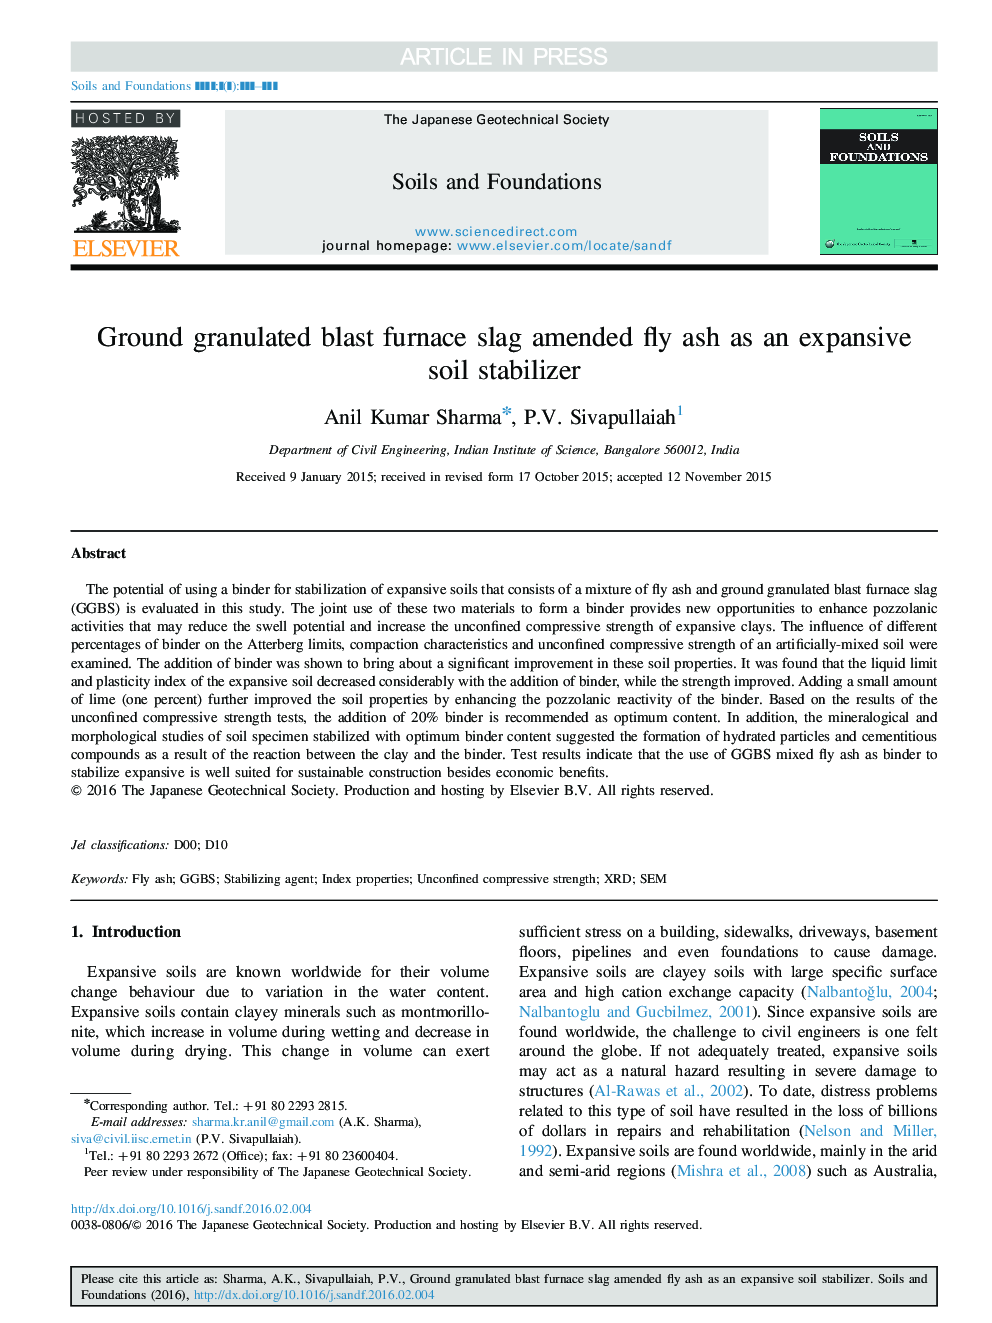 Ground granulated blast furnace slag amended fly ash as an expansive soil stabilizer